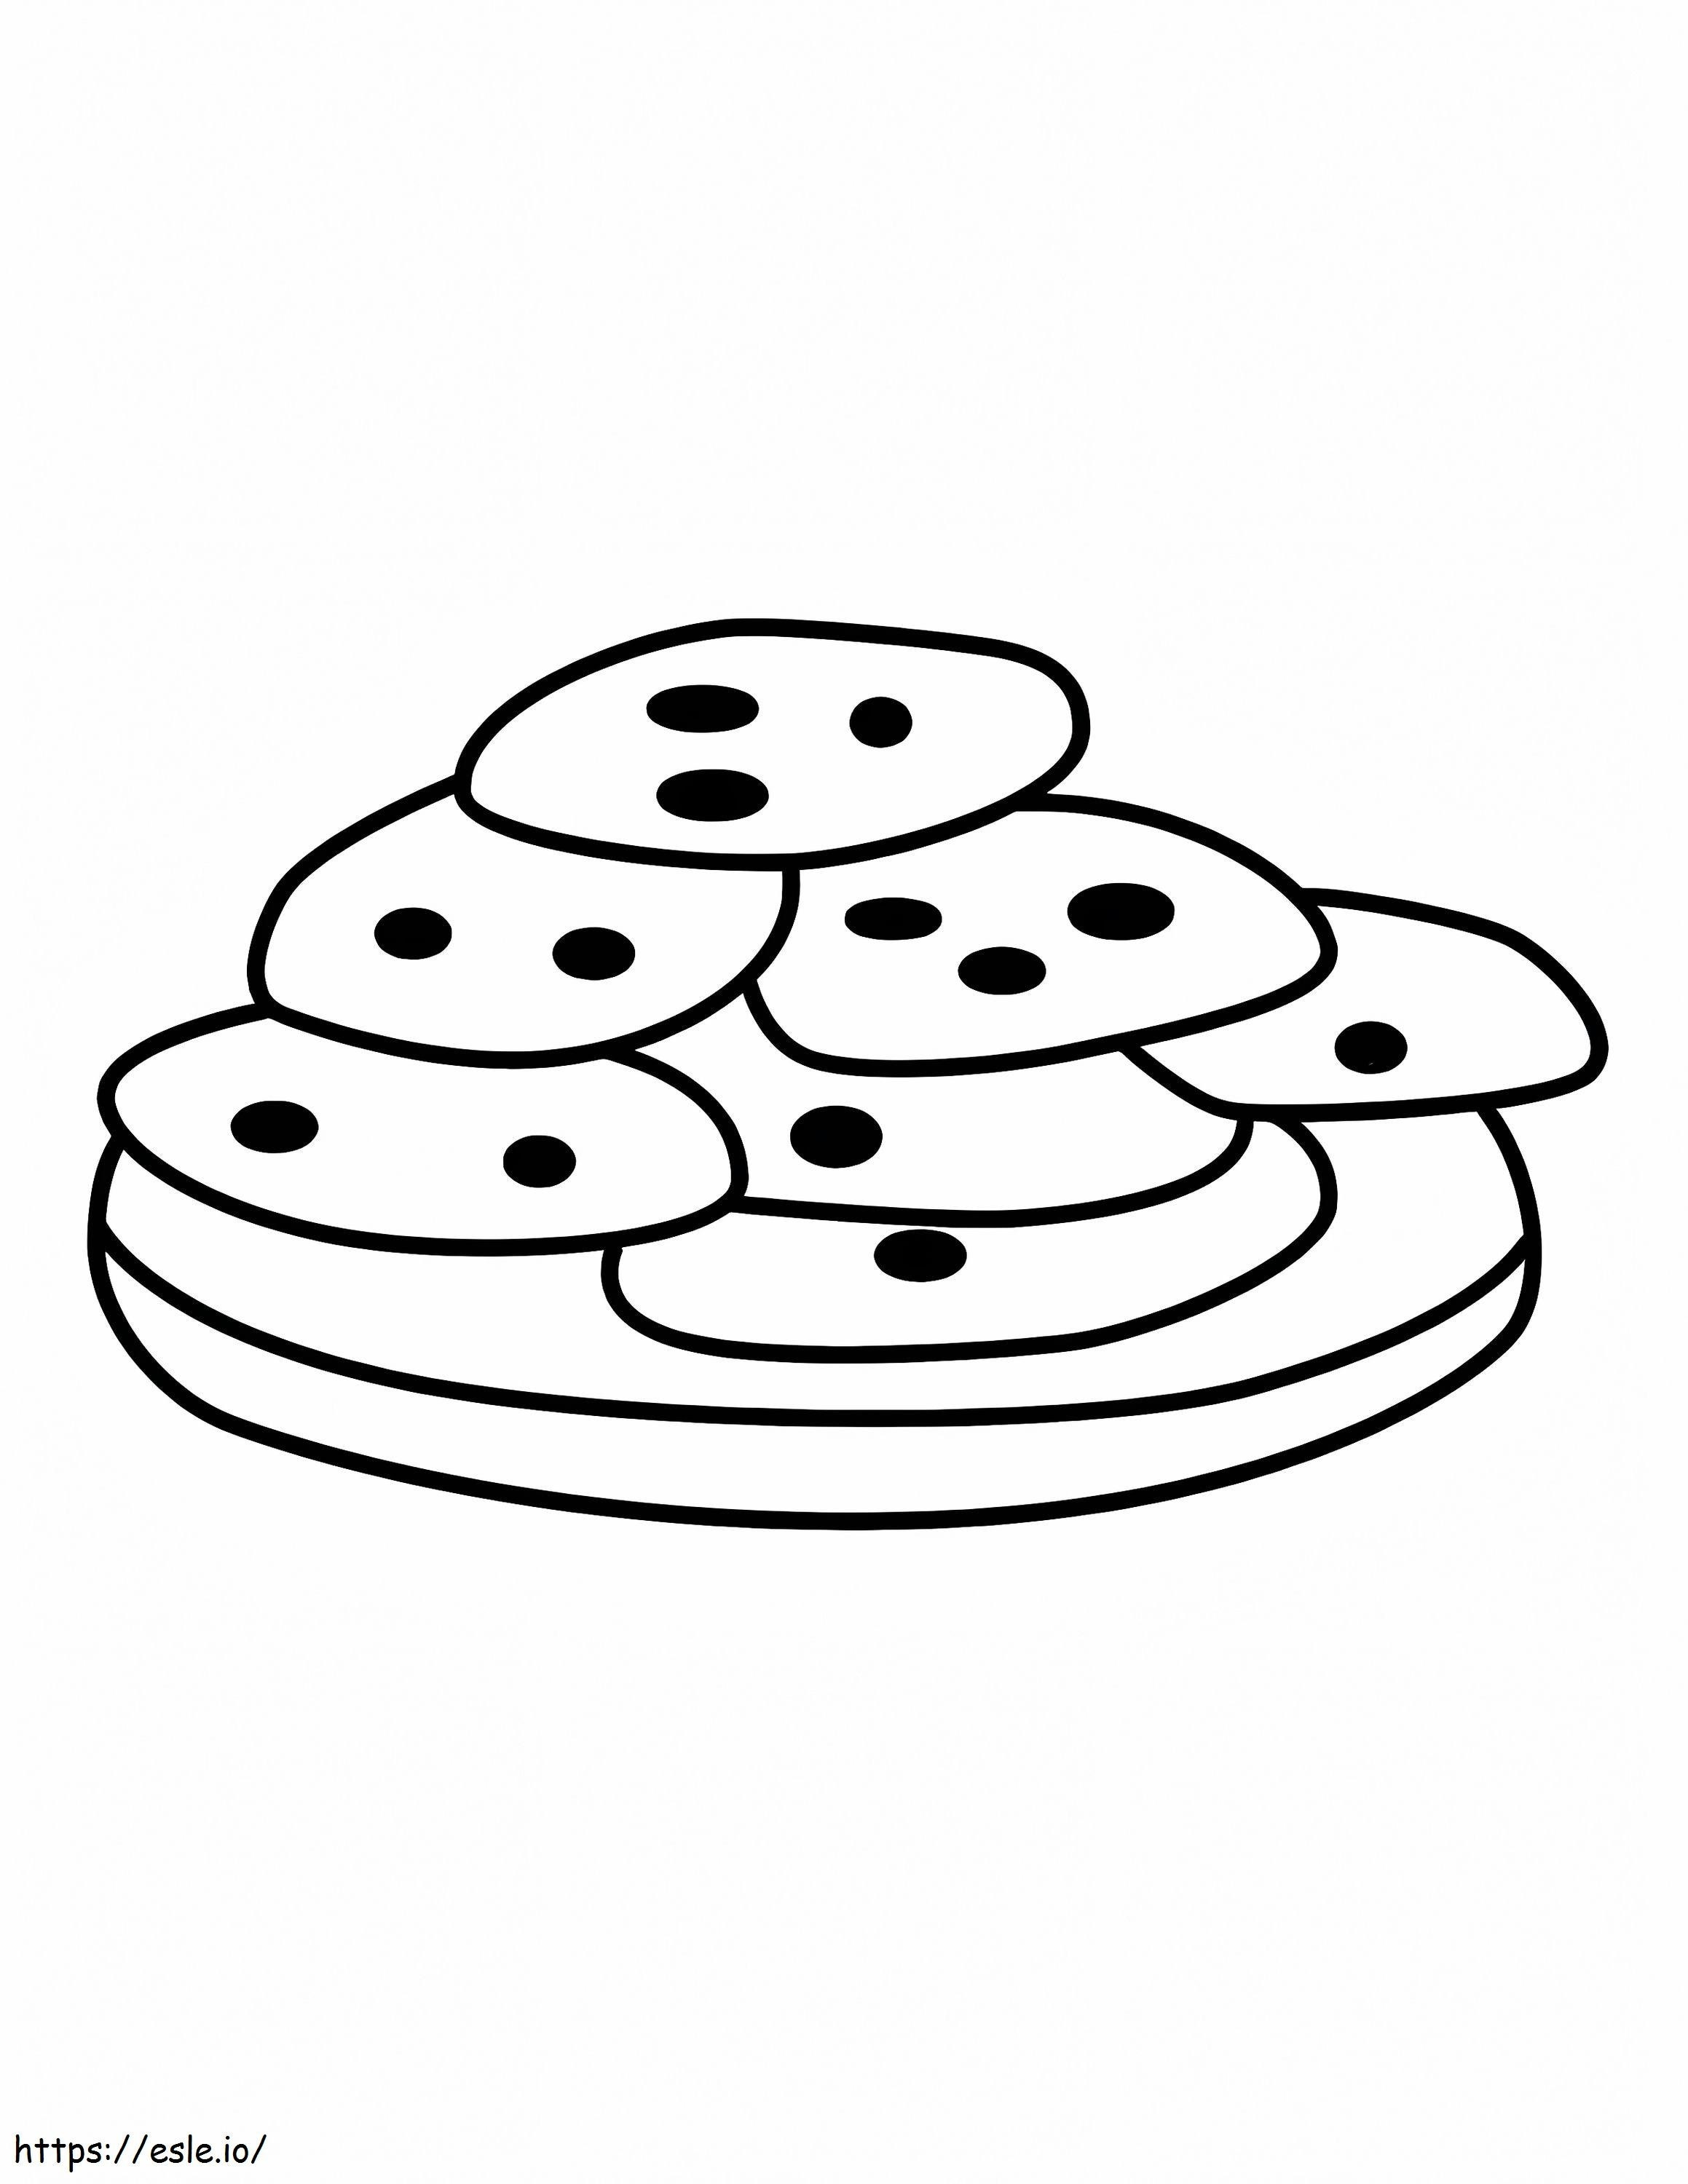 Cookie Disk coloring page